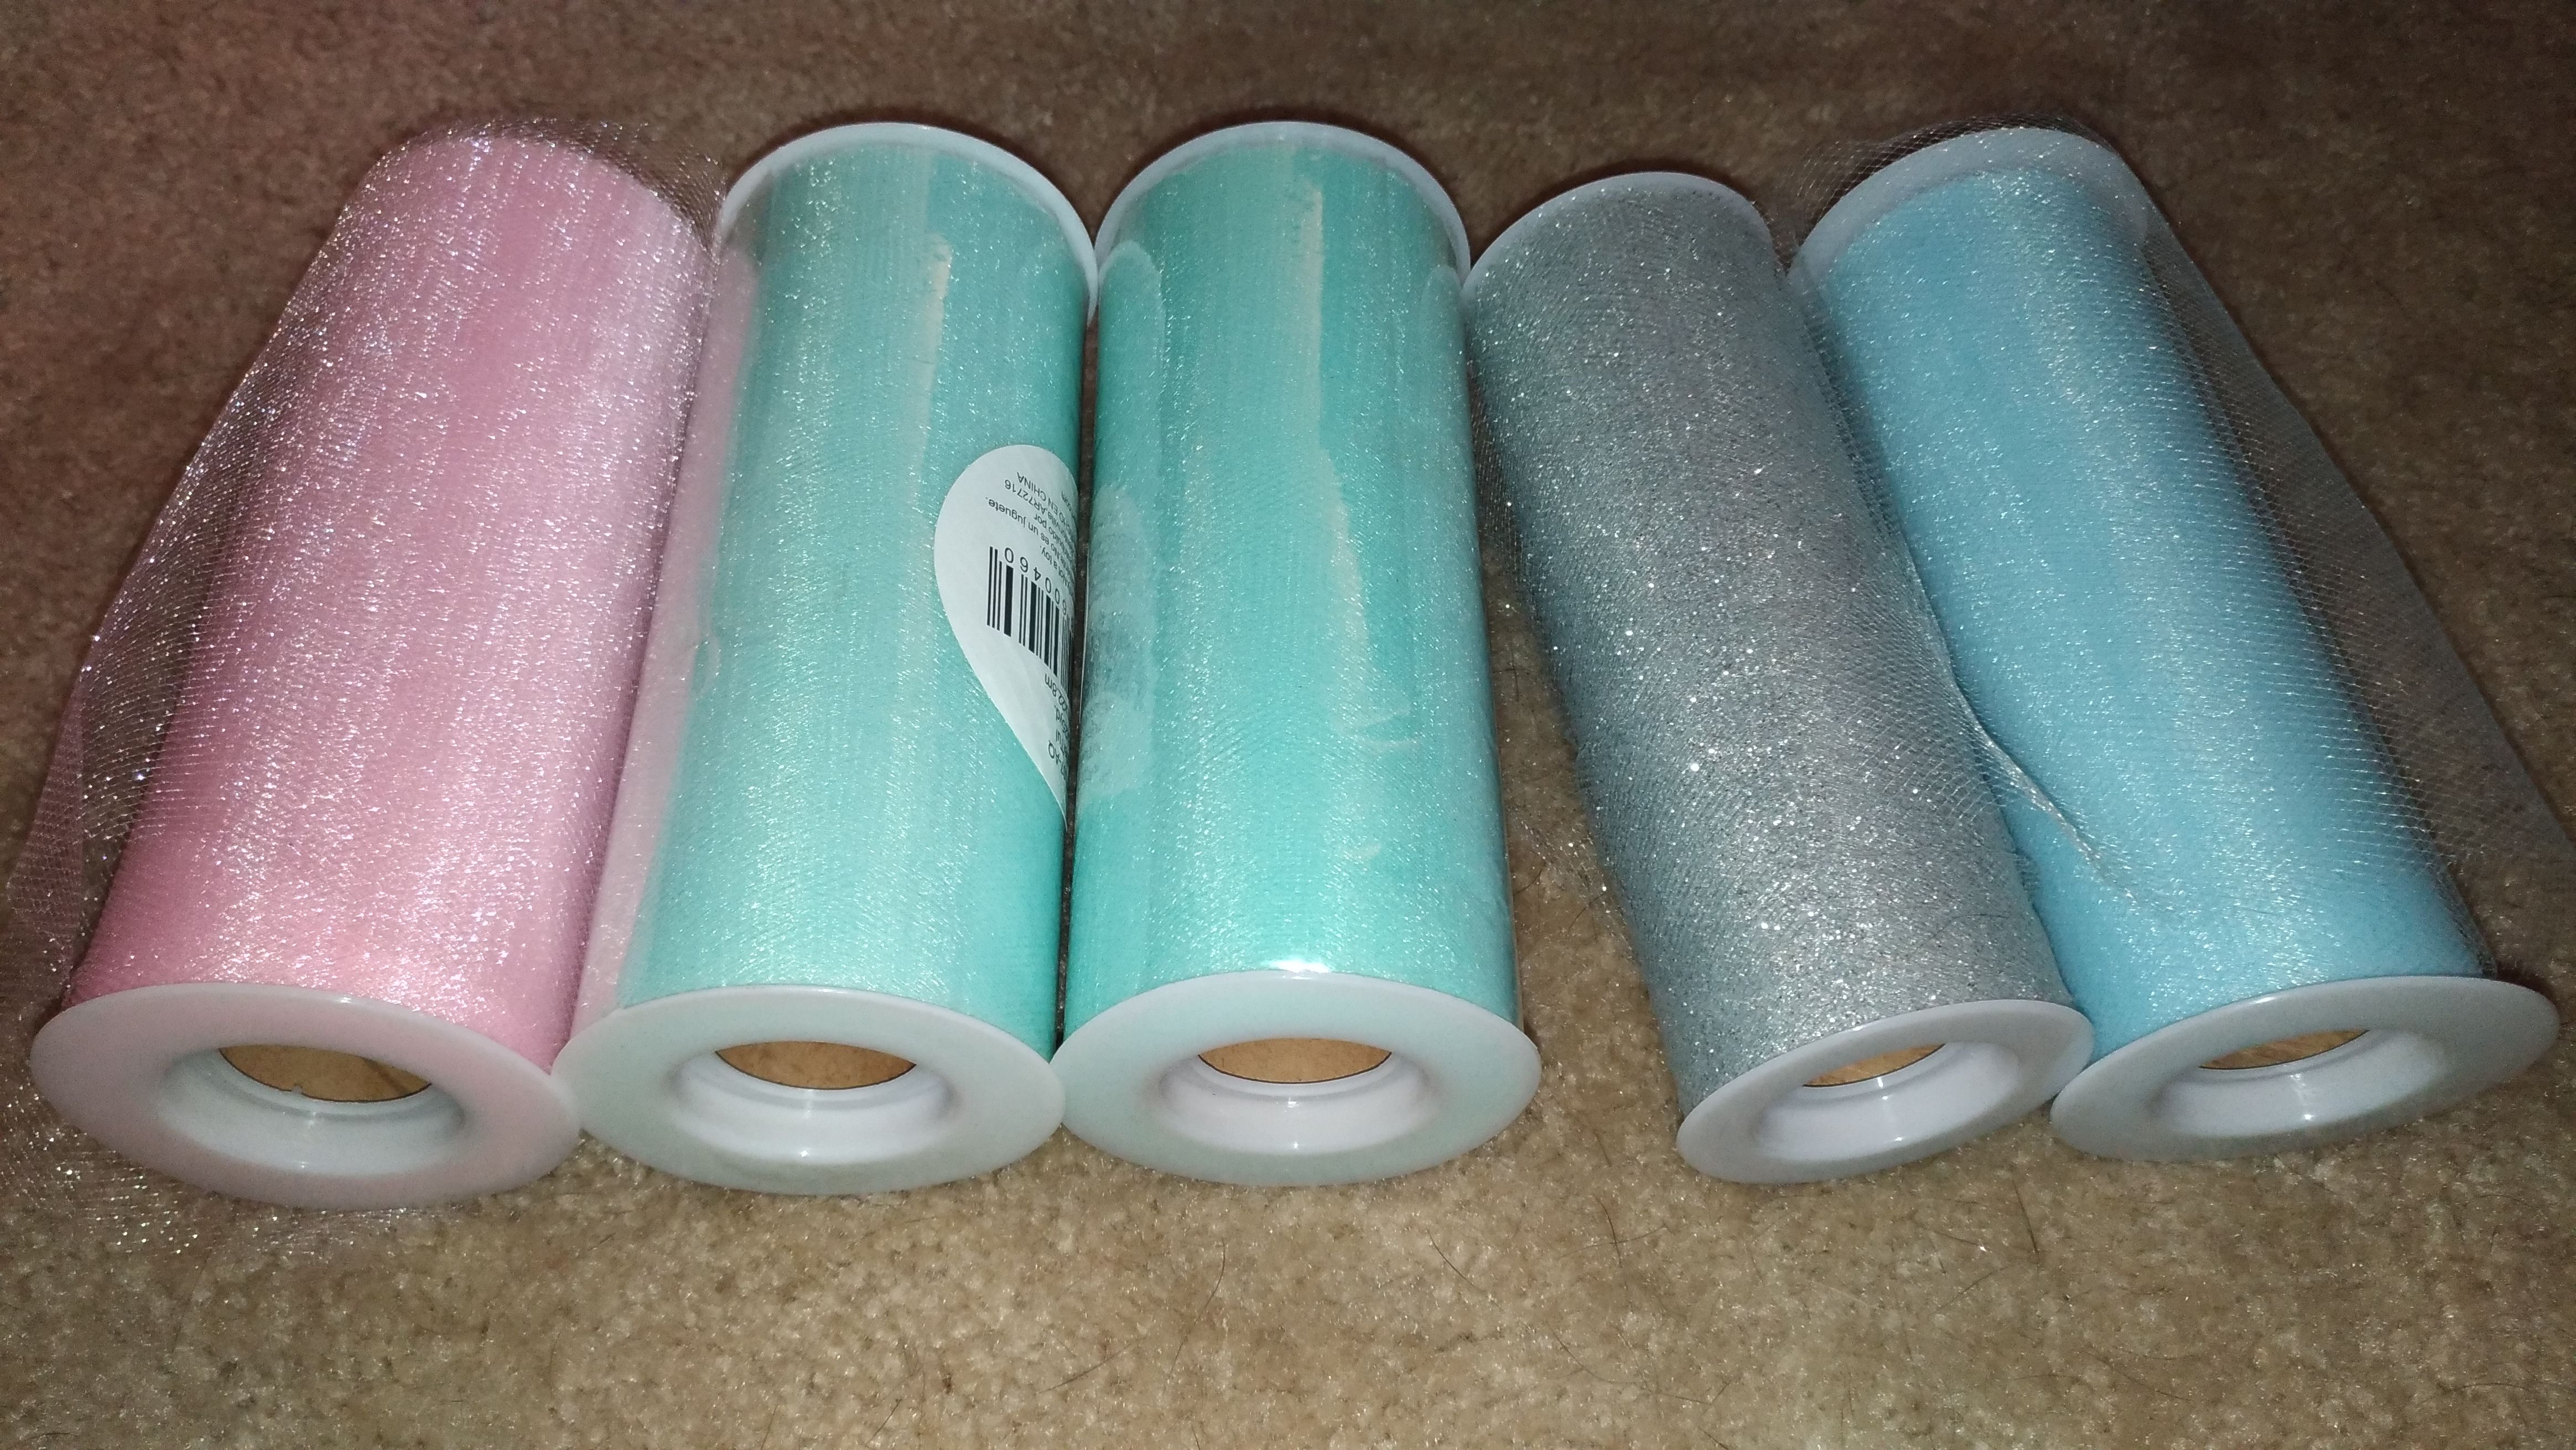 5 spools of Tulle for tu-tu's and more!